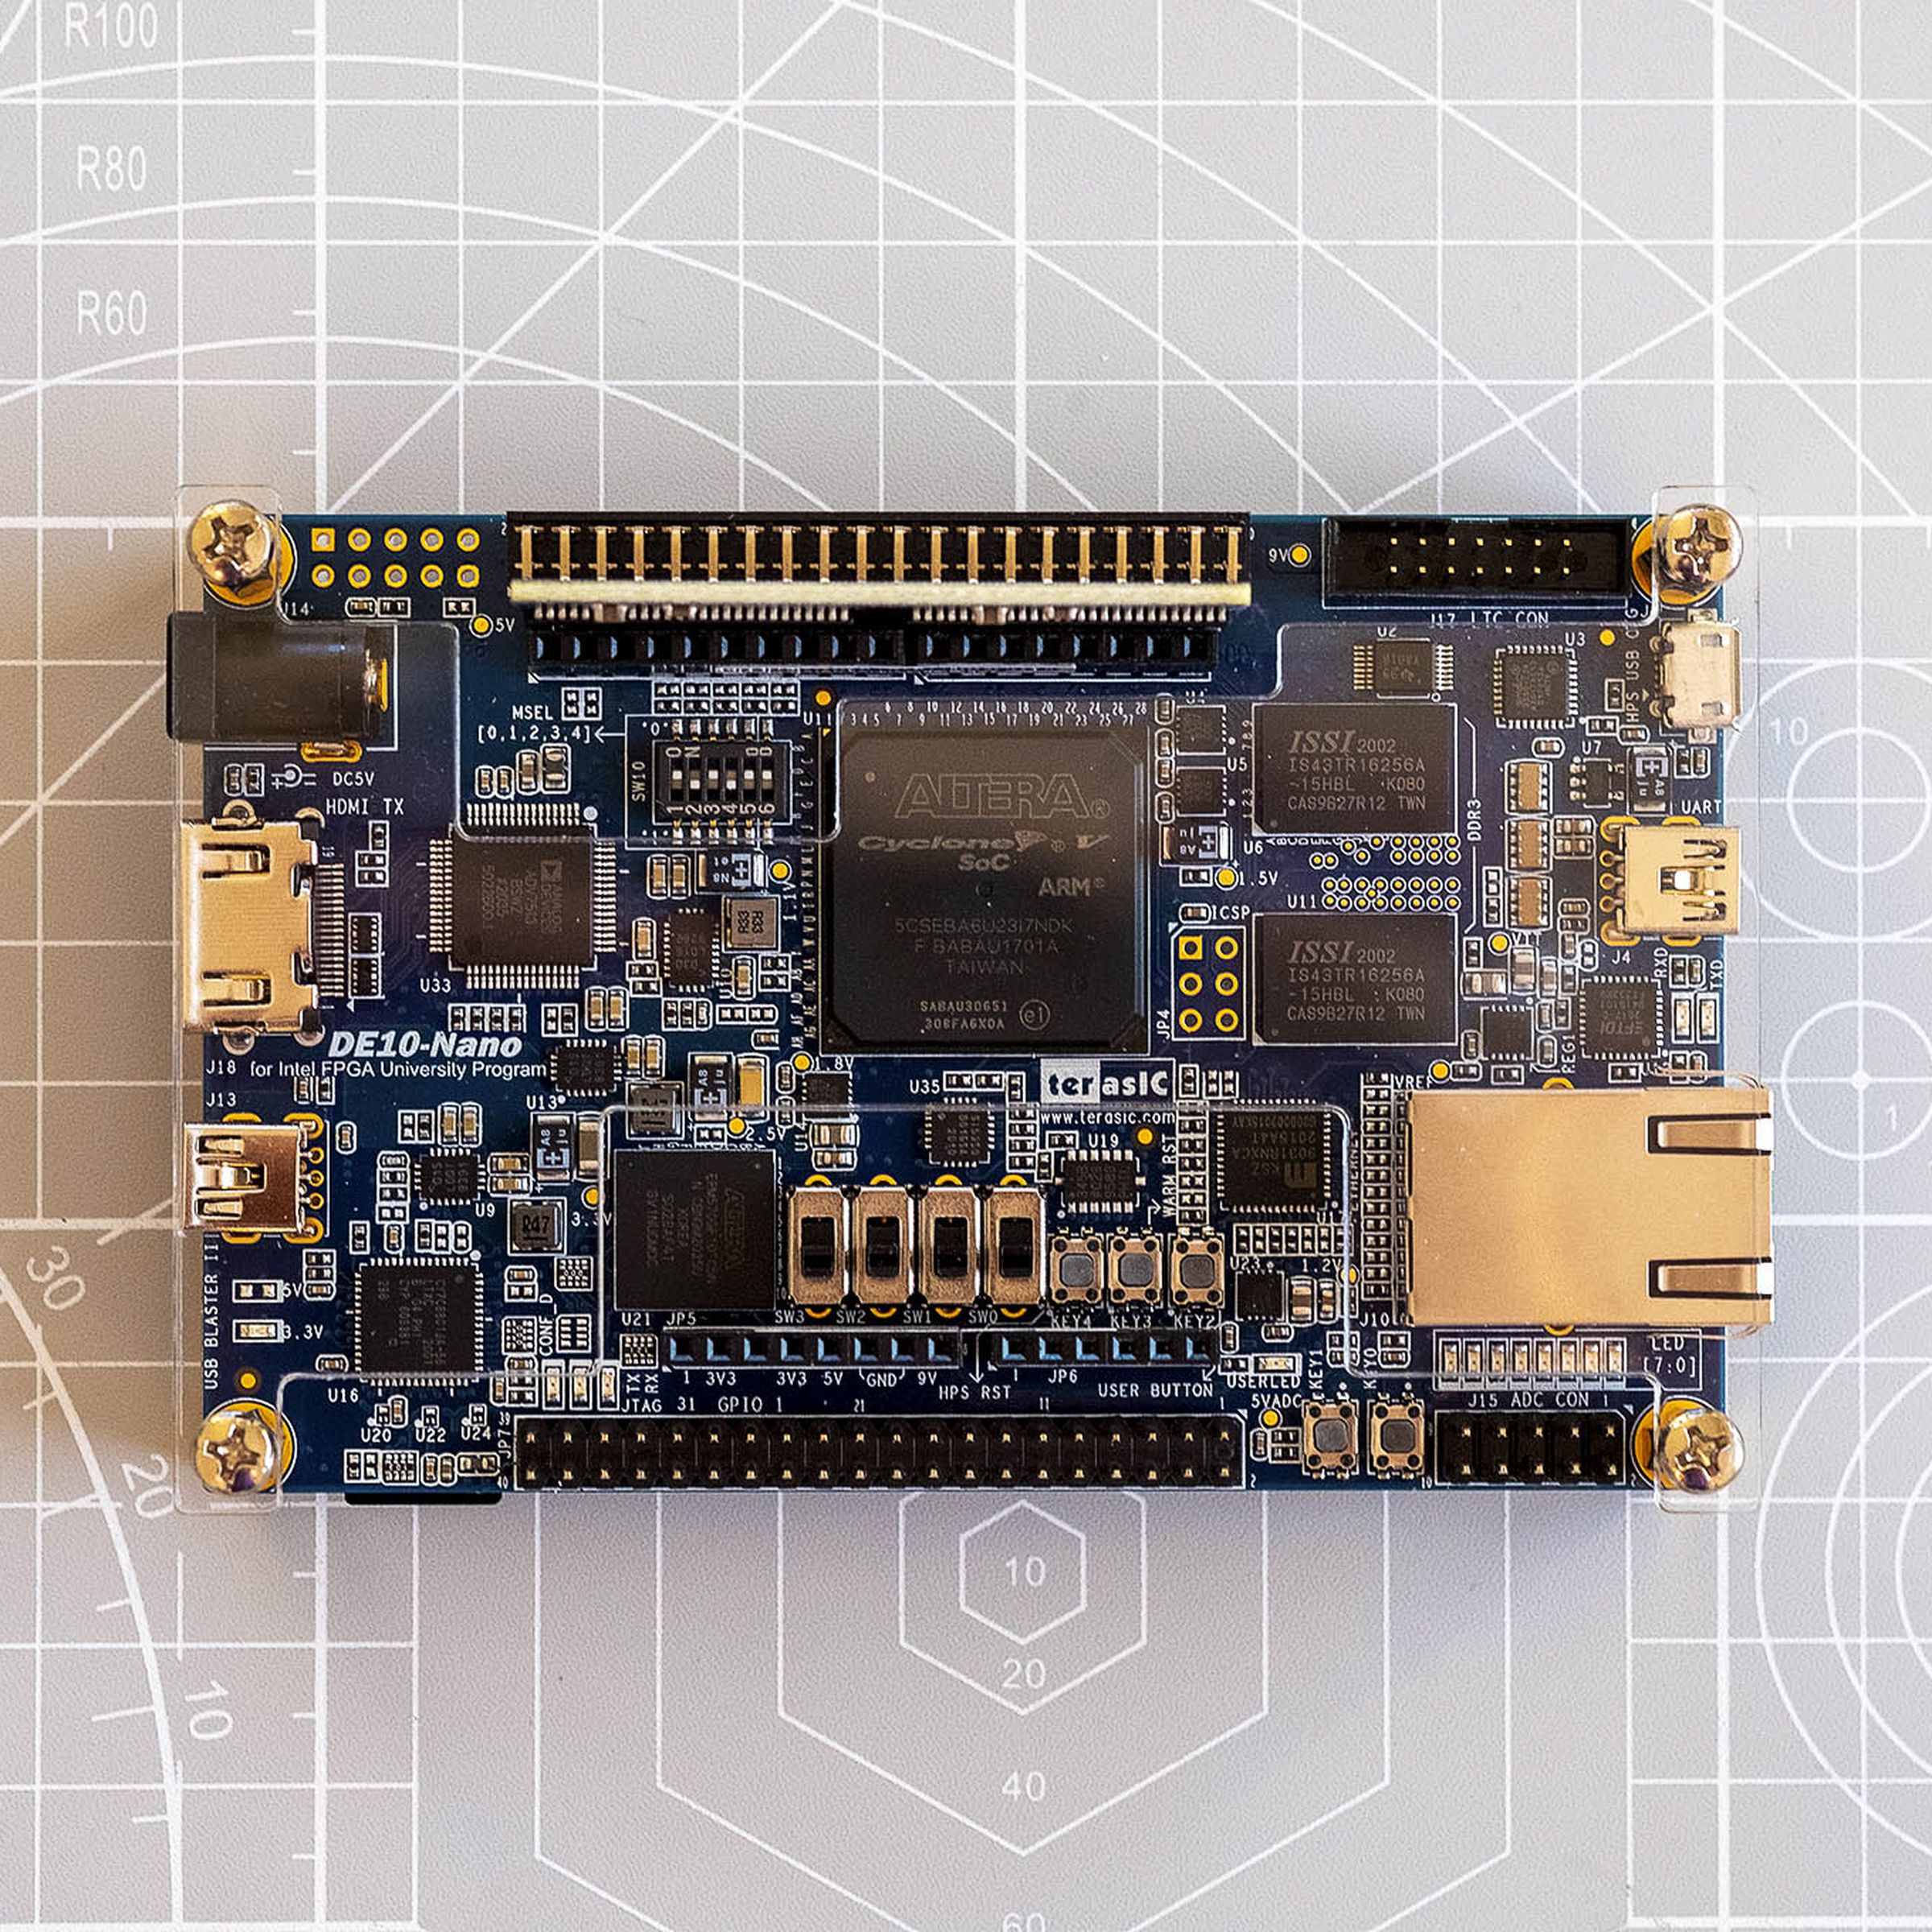 The DE10-Nano, an FPGA board used with the open-source MiSTer project.